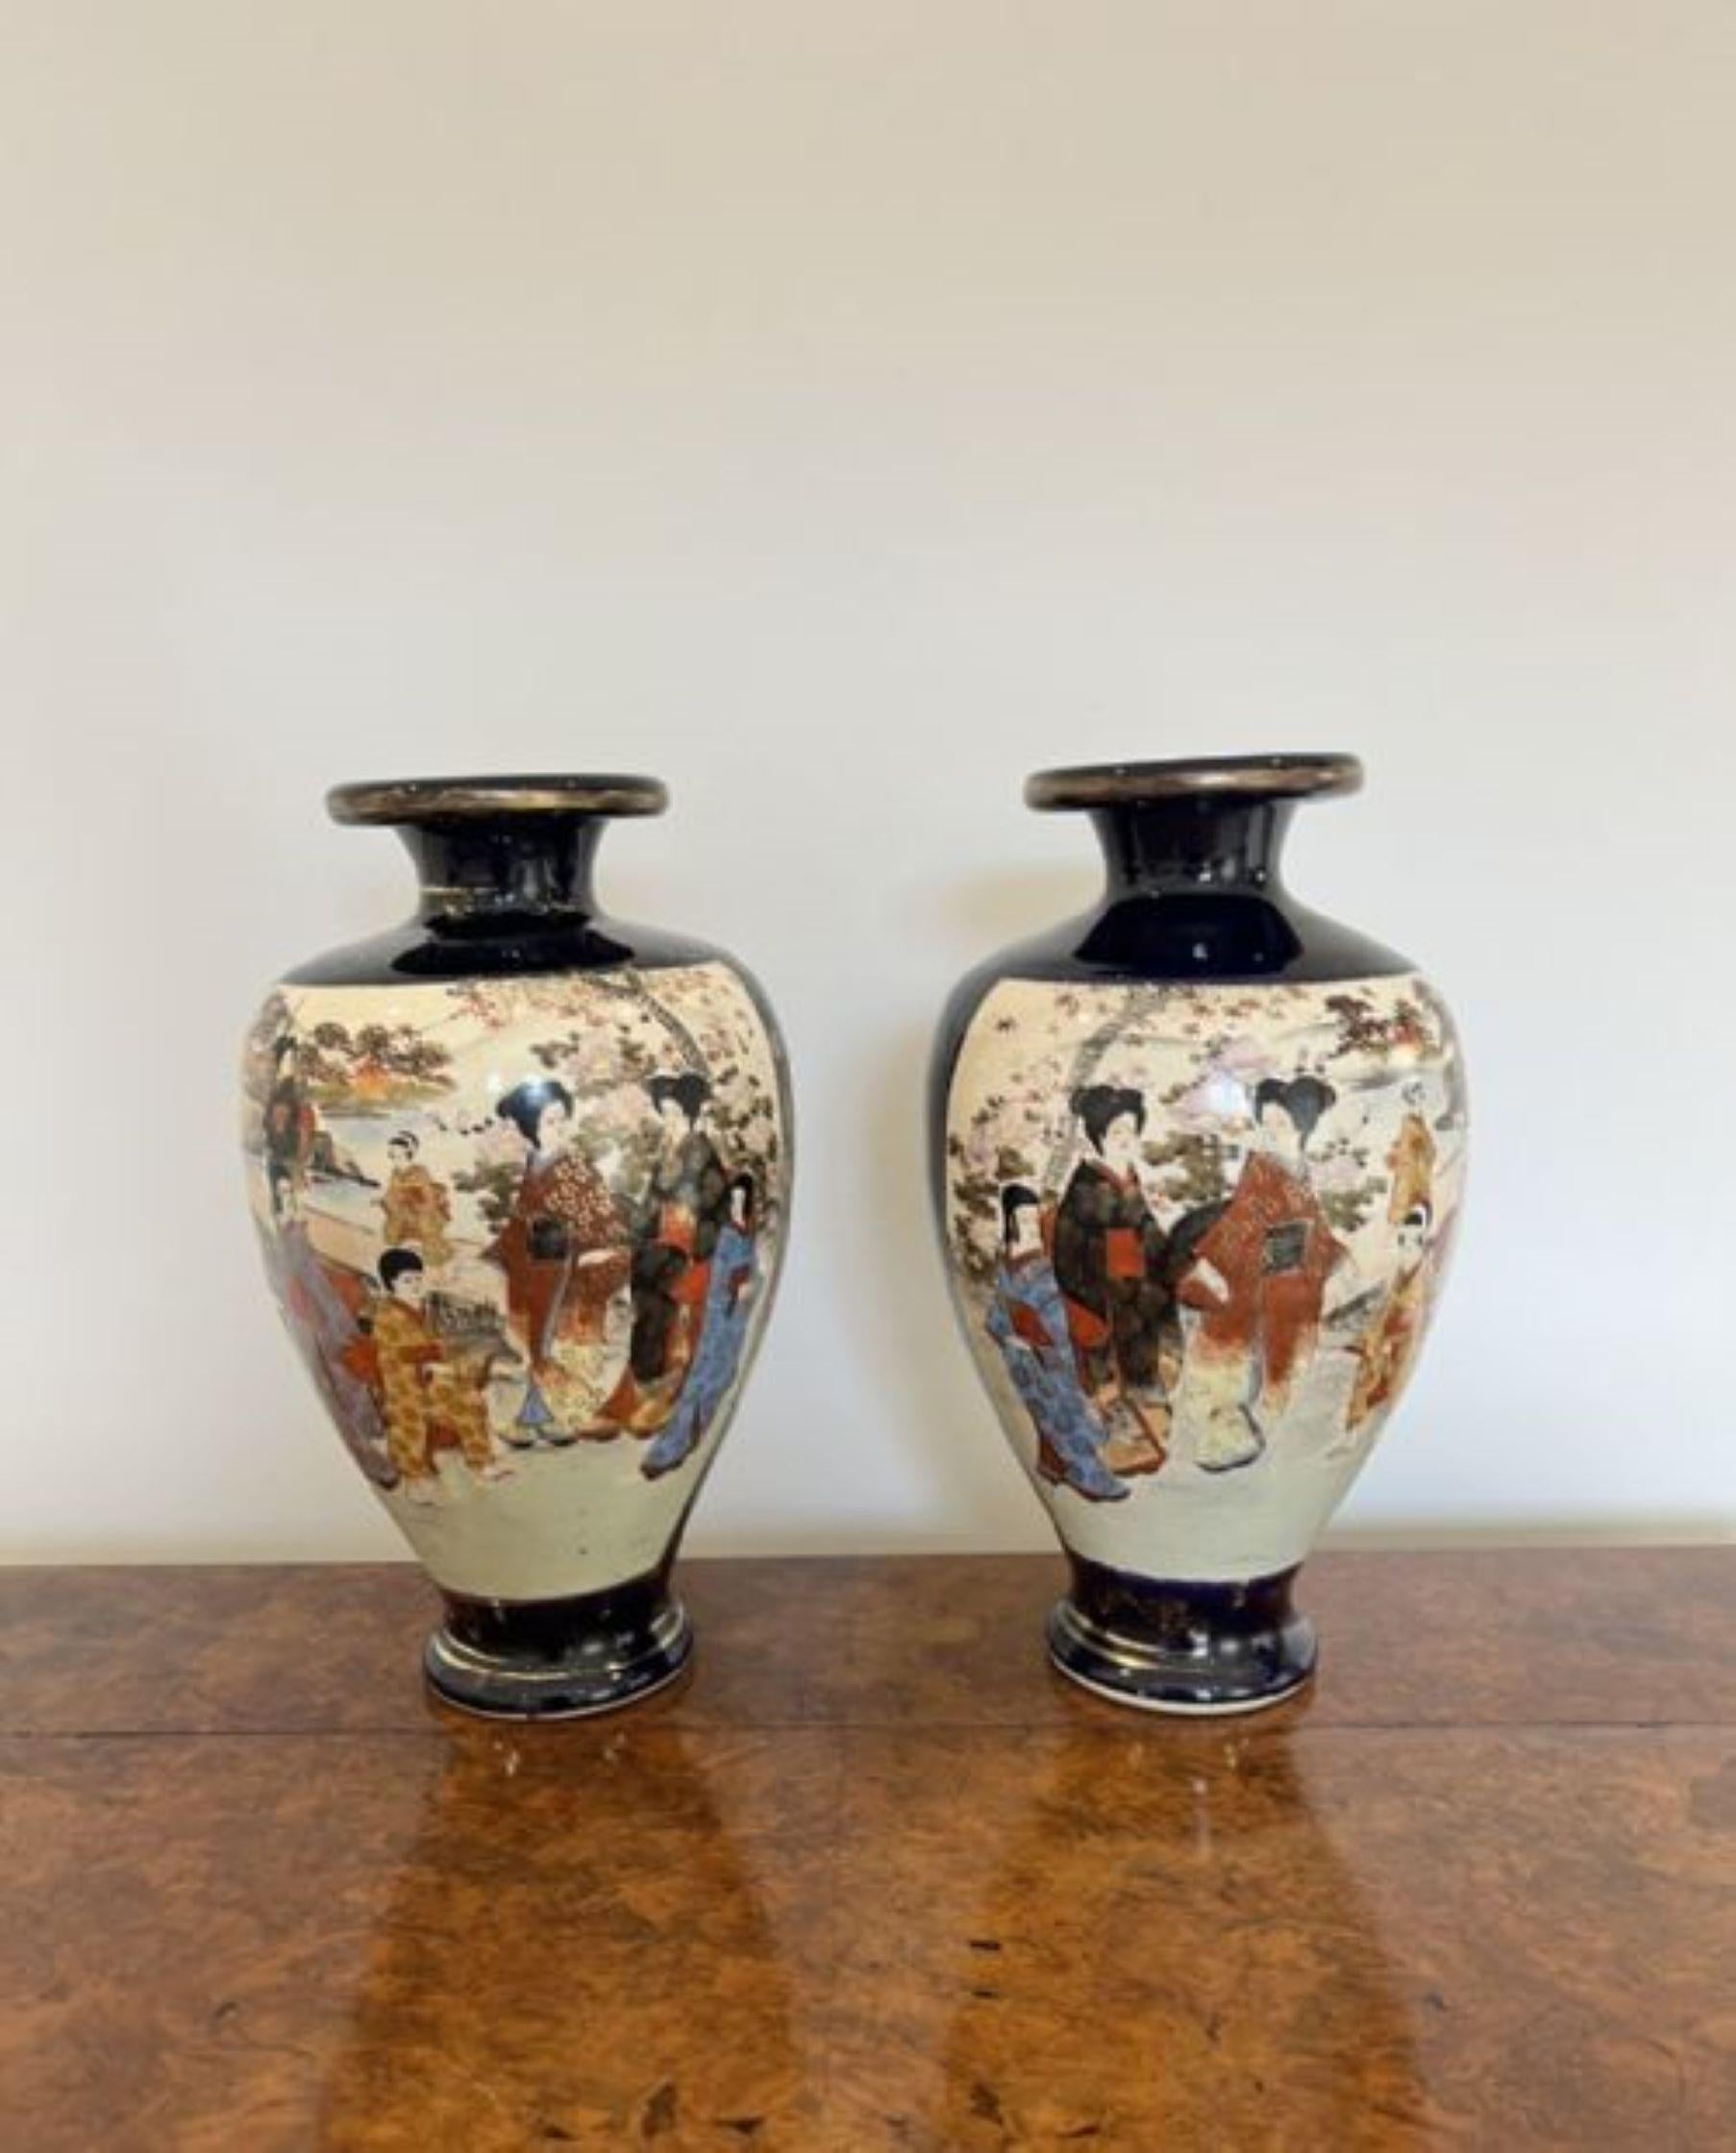 Large pair of antique quality Japanese satsuma vases having a quality pair of antique Japanese satsuma vases with wonderful hand painted decoration of figural and landscape scenes in blue, red, orange, black and gold colours. 
